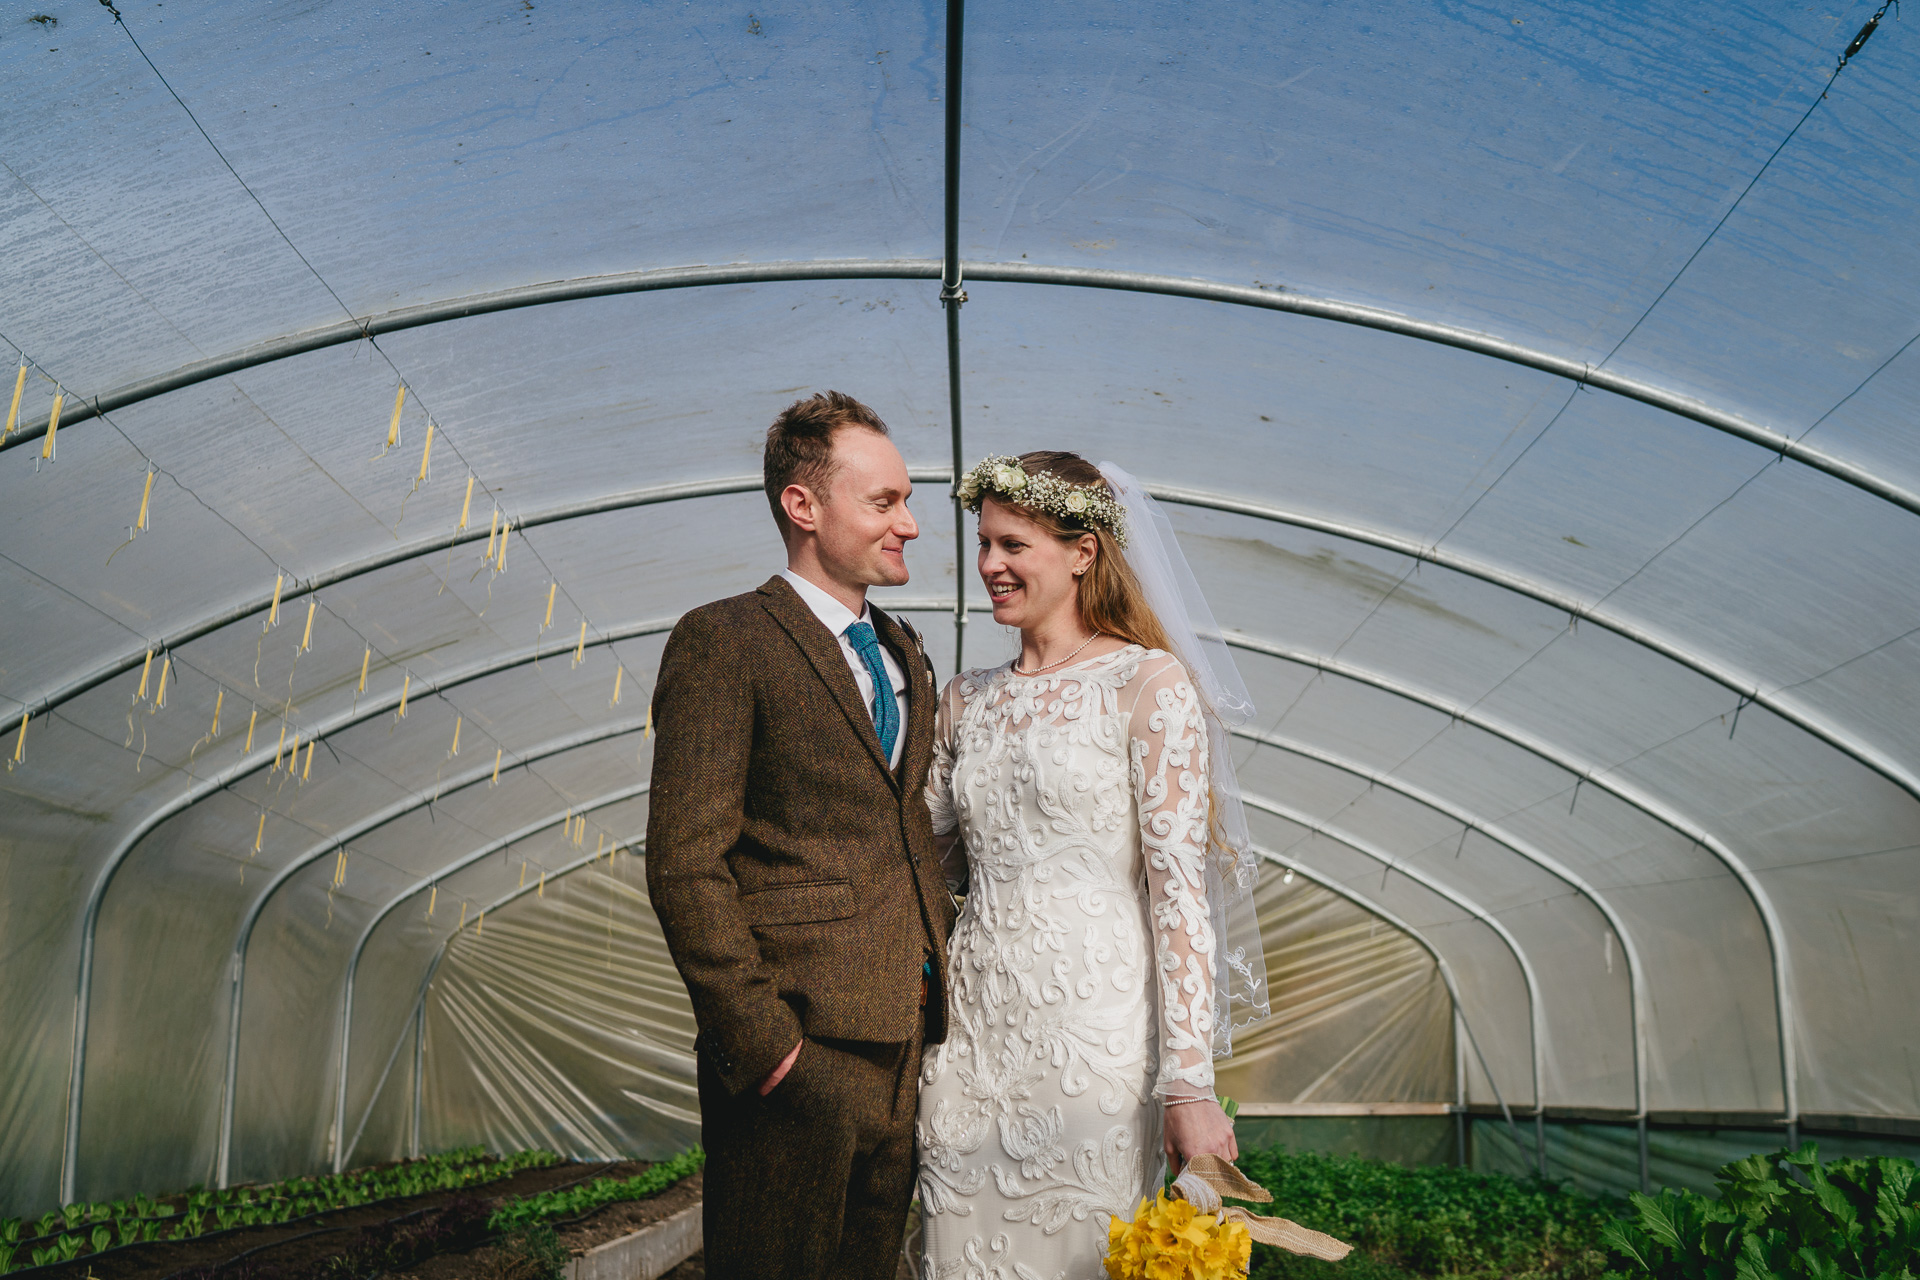 A bride and groom cuddling and smiling in a poly tunnel